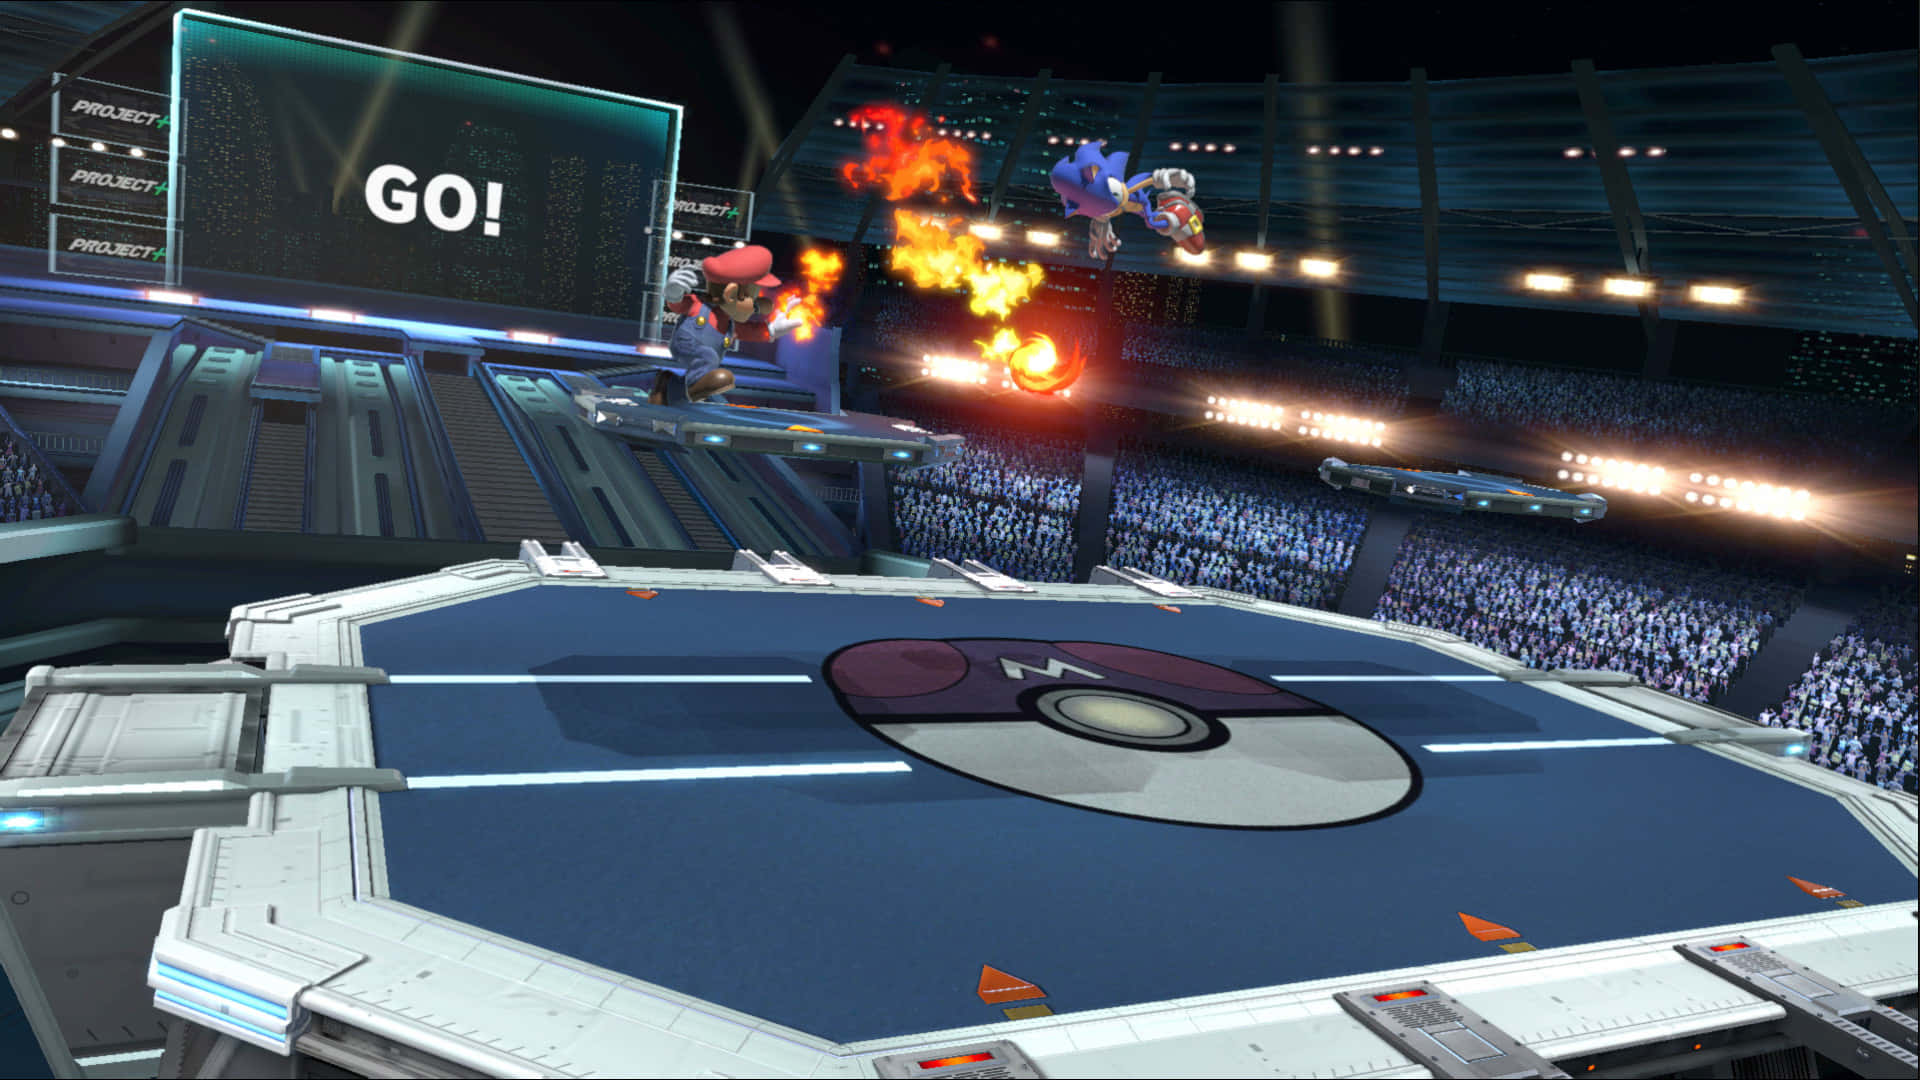 Join millions of trainers and battle for glory in Pokemon Stadium Wallpaper